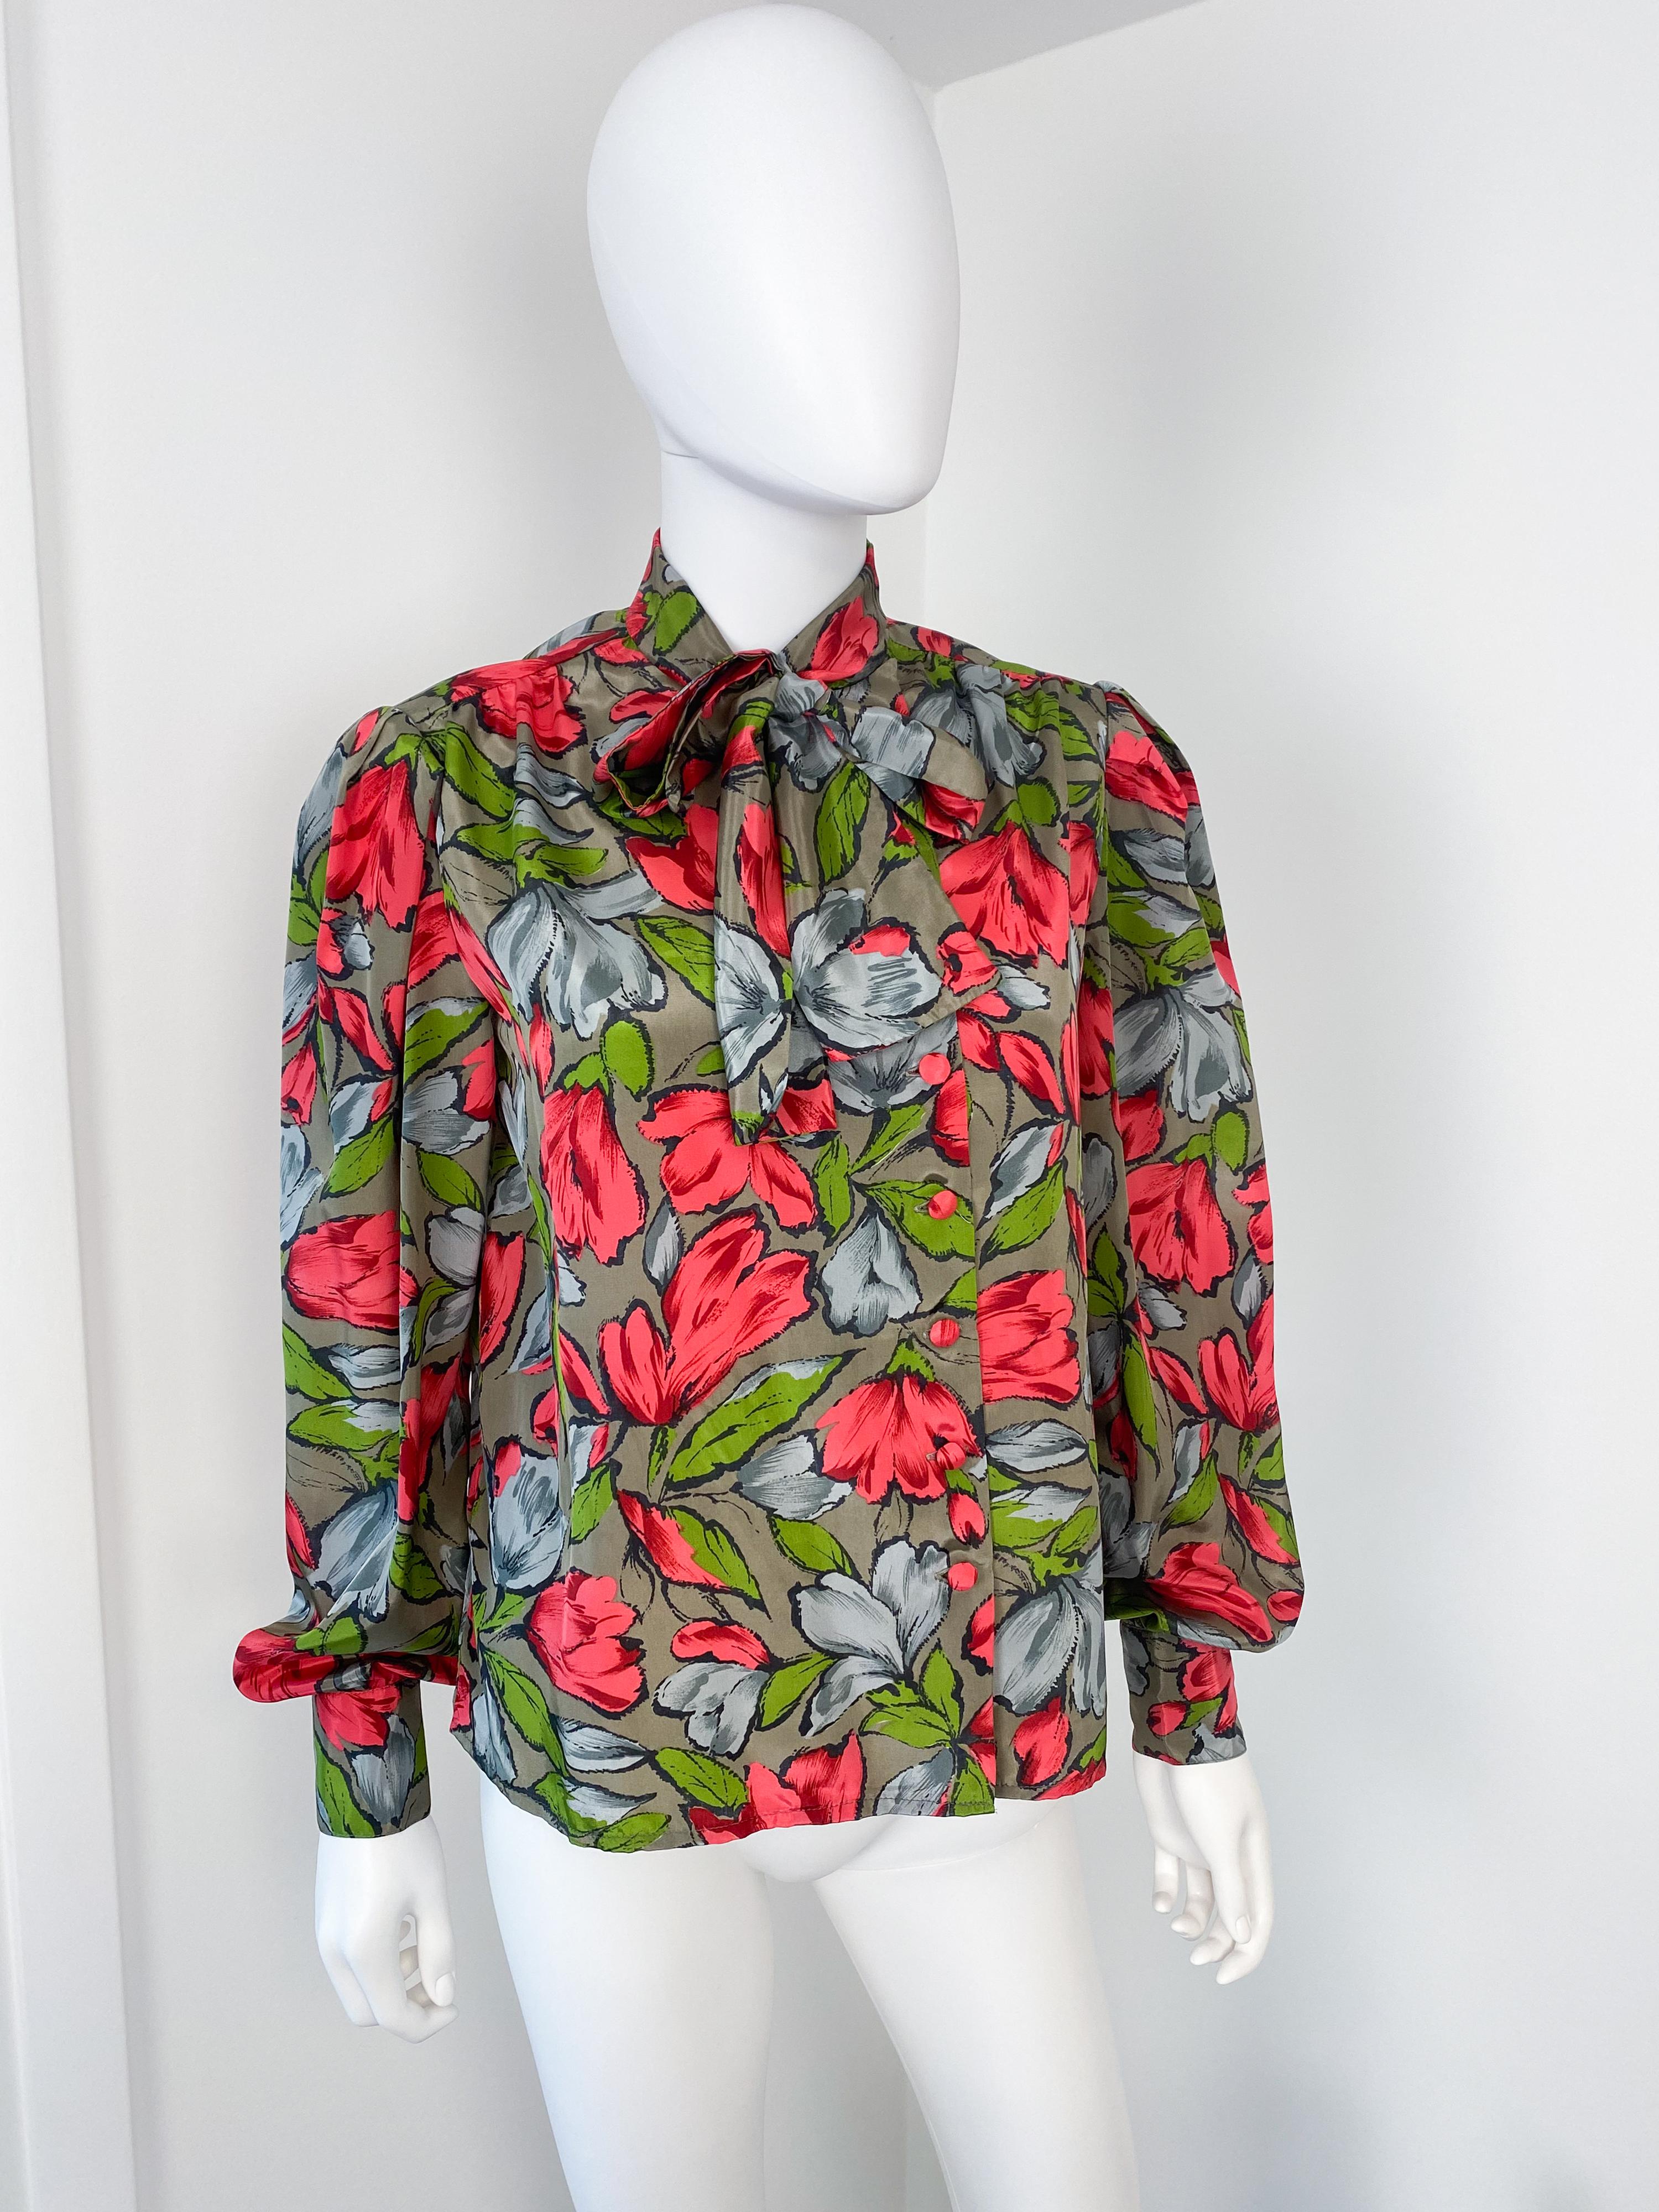 Wonderful vintage 1980s silky polyester pussy bow blouse with attached bow-scarf. Taupe color fabric with big flower pattern in red, green, and gray colors with black contrast. The buttons closing is asymmetric and located on the side.
There is